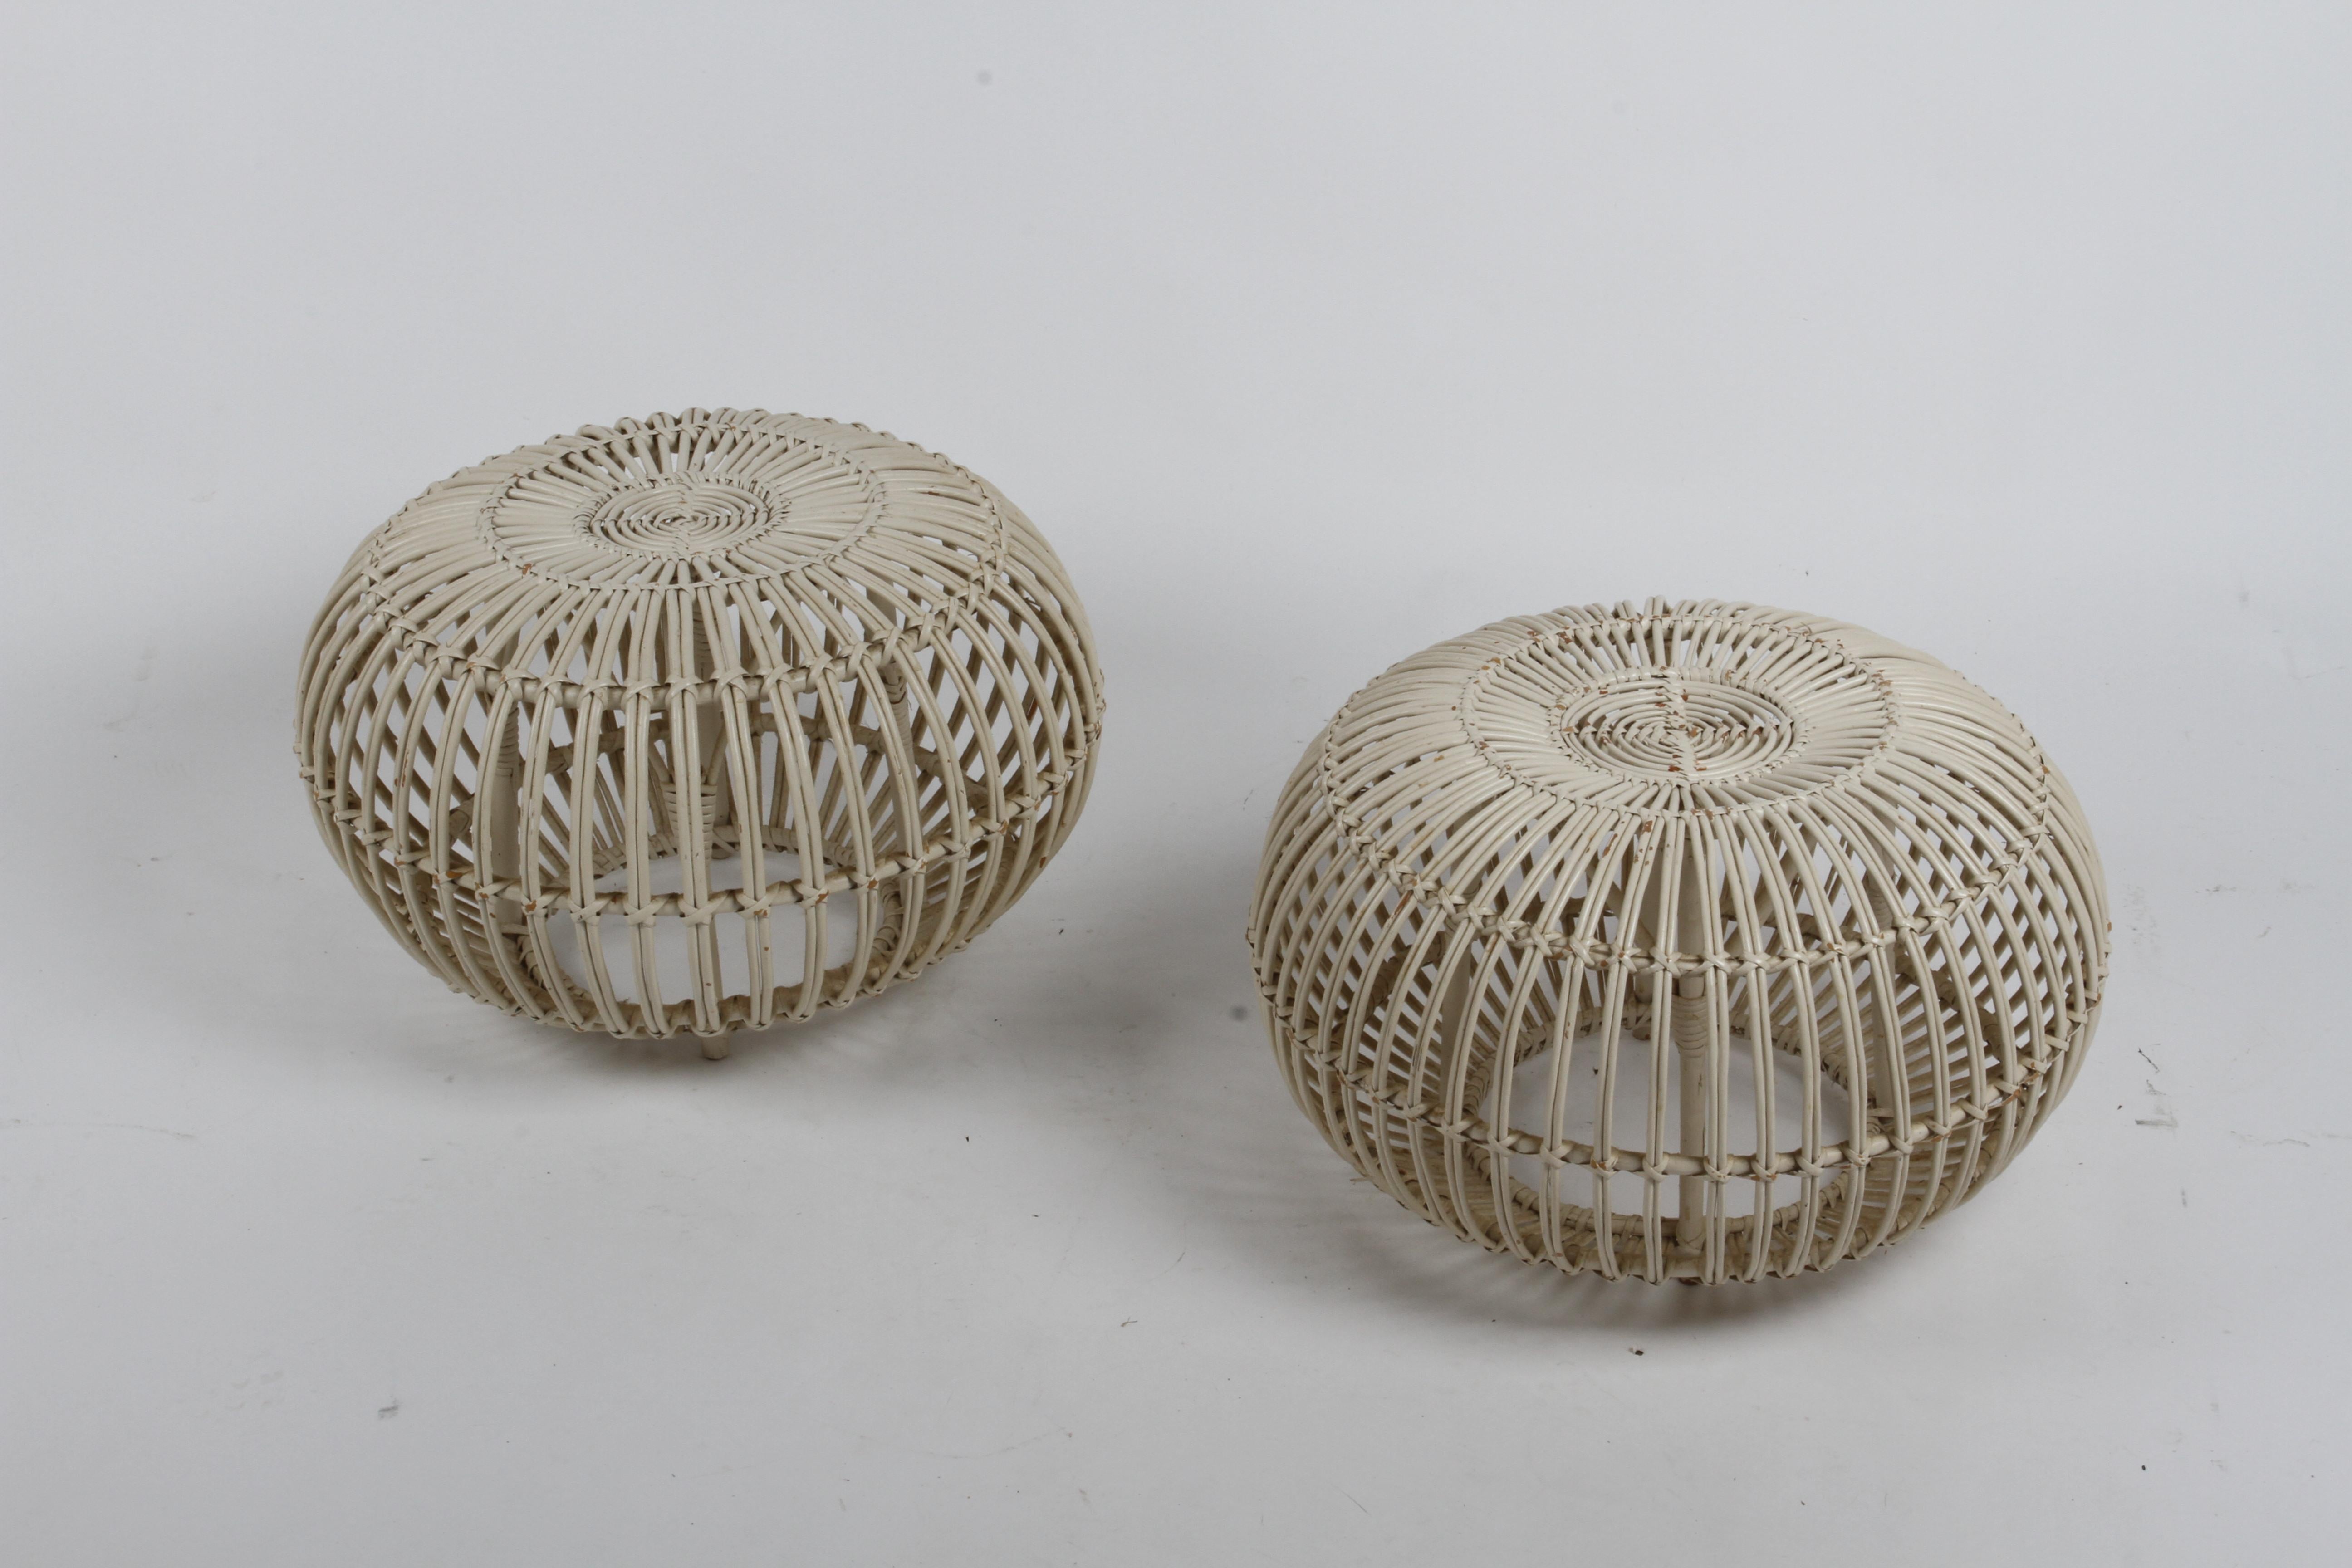 Pair of Mid-Century modern Franco Albini round wicker ottomans, stools or side tables painted in off white. Manufactured by Vittorio Bonacina, Italy. Paint appears to be original, some loss to paint. 